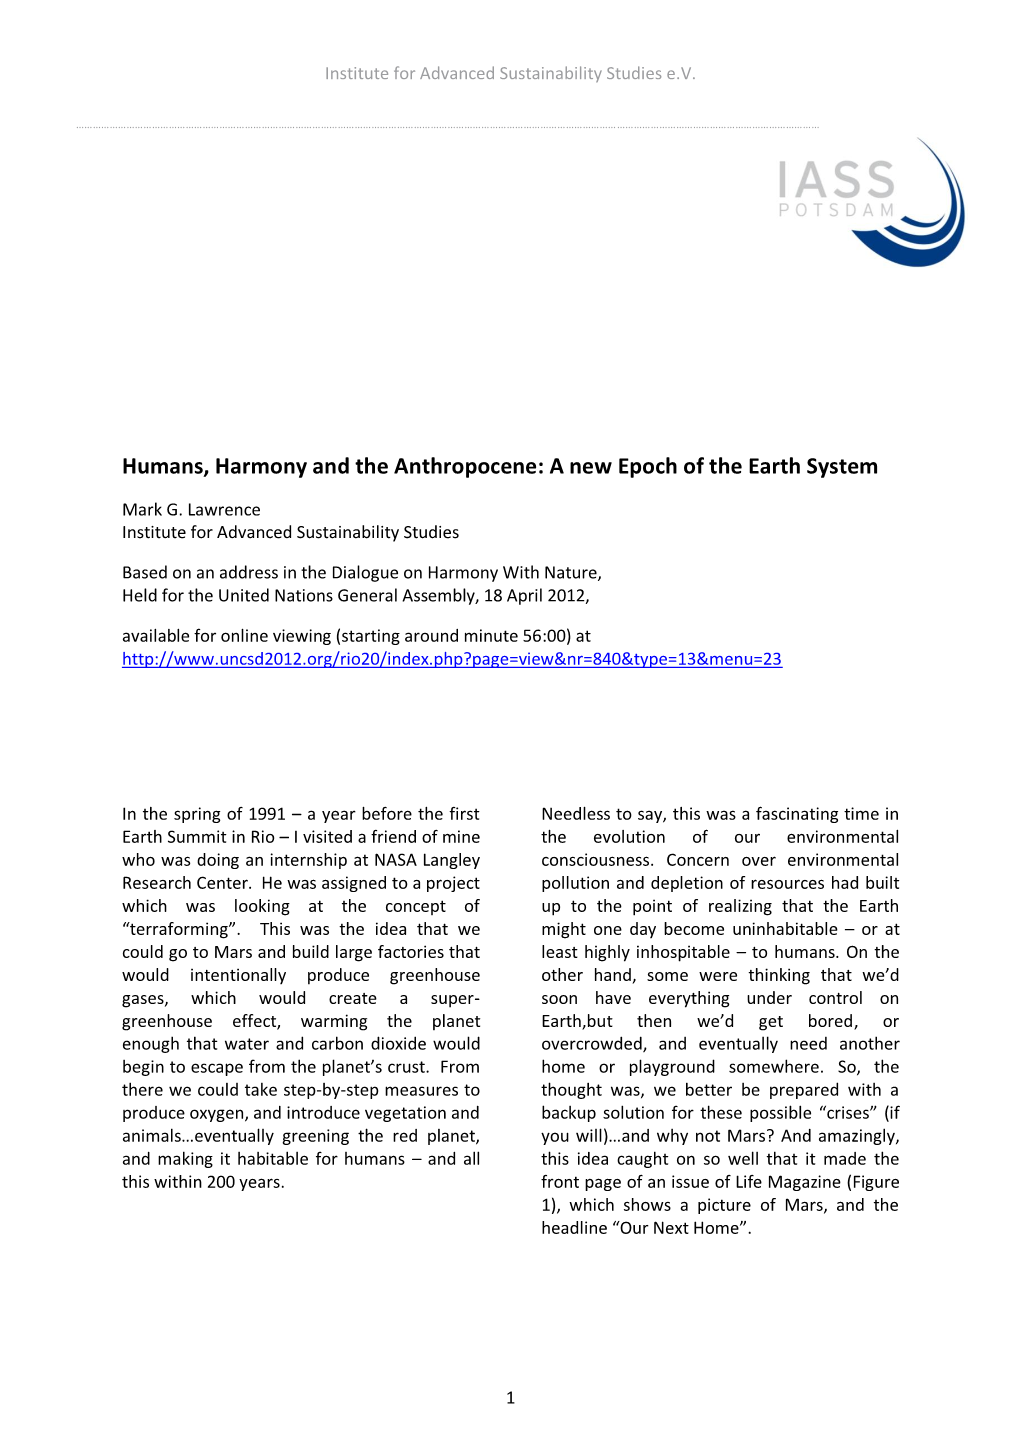 Humans, Harmony and the Anthropocene: a New Epoch of the Earth System